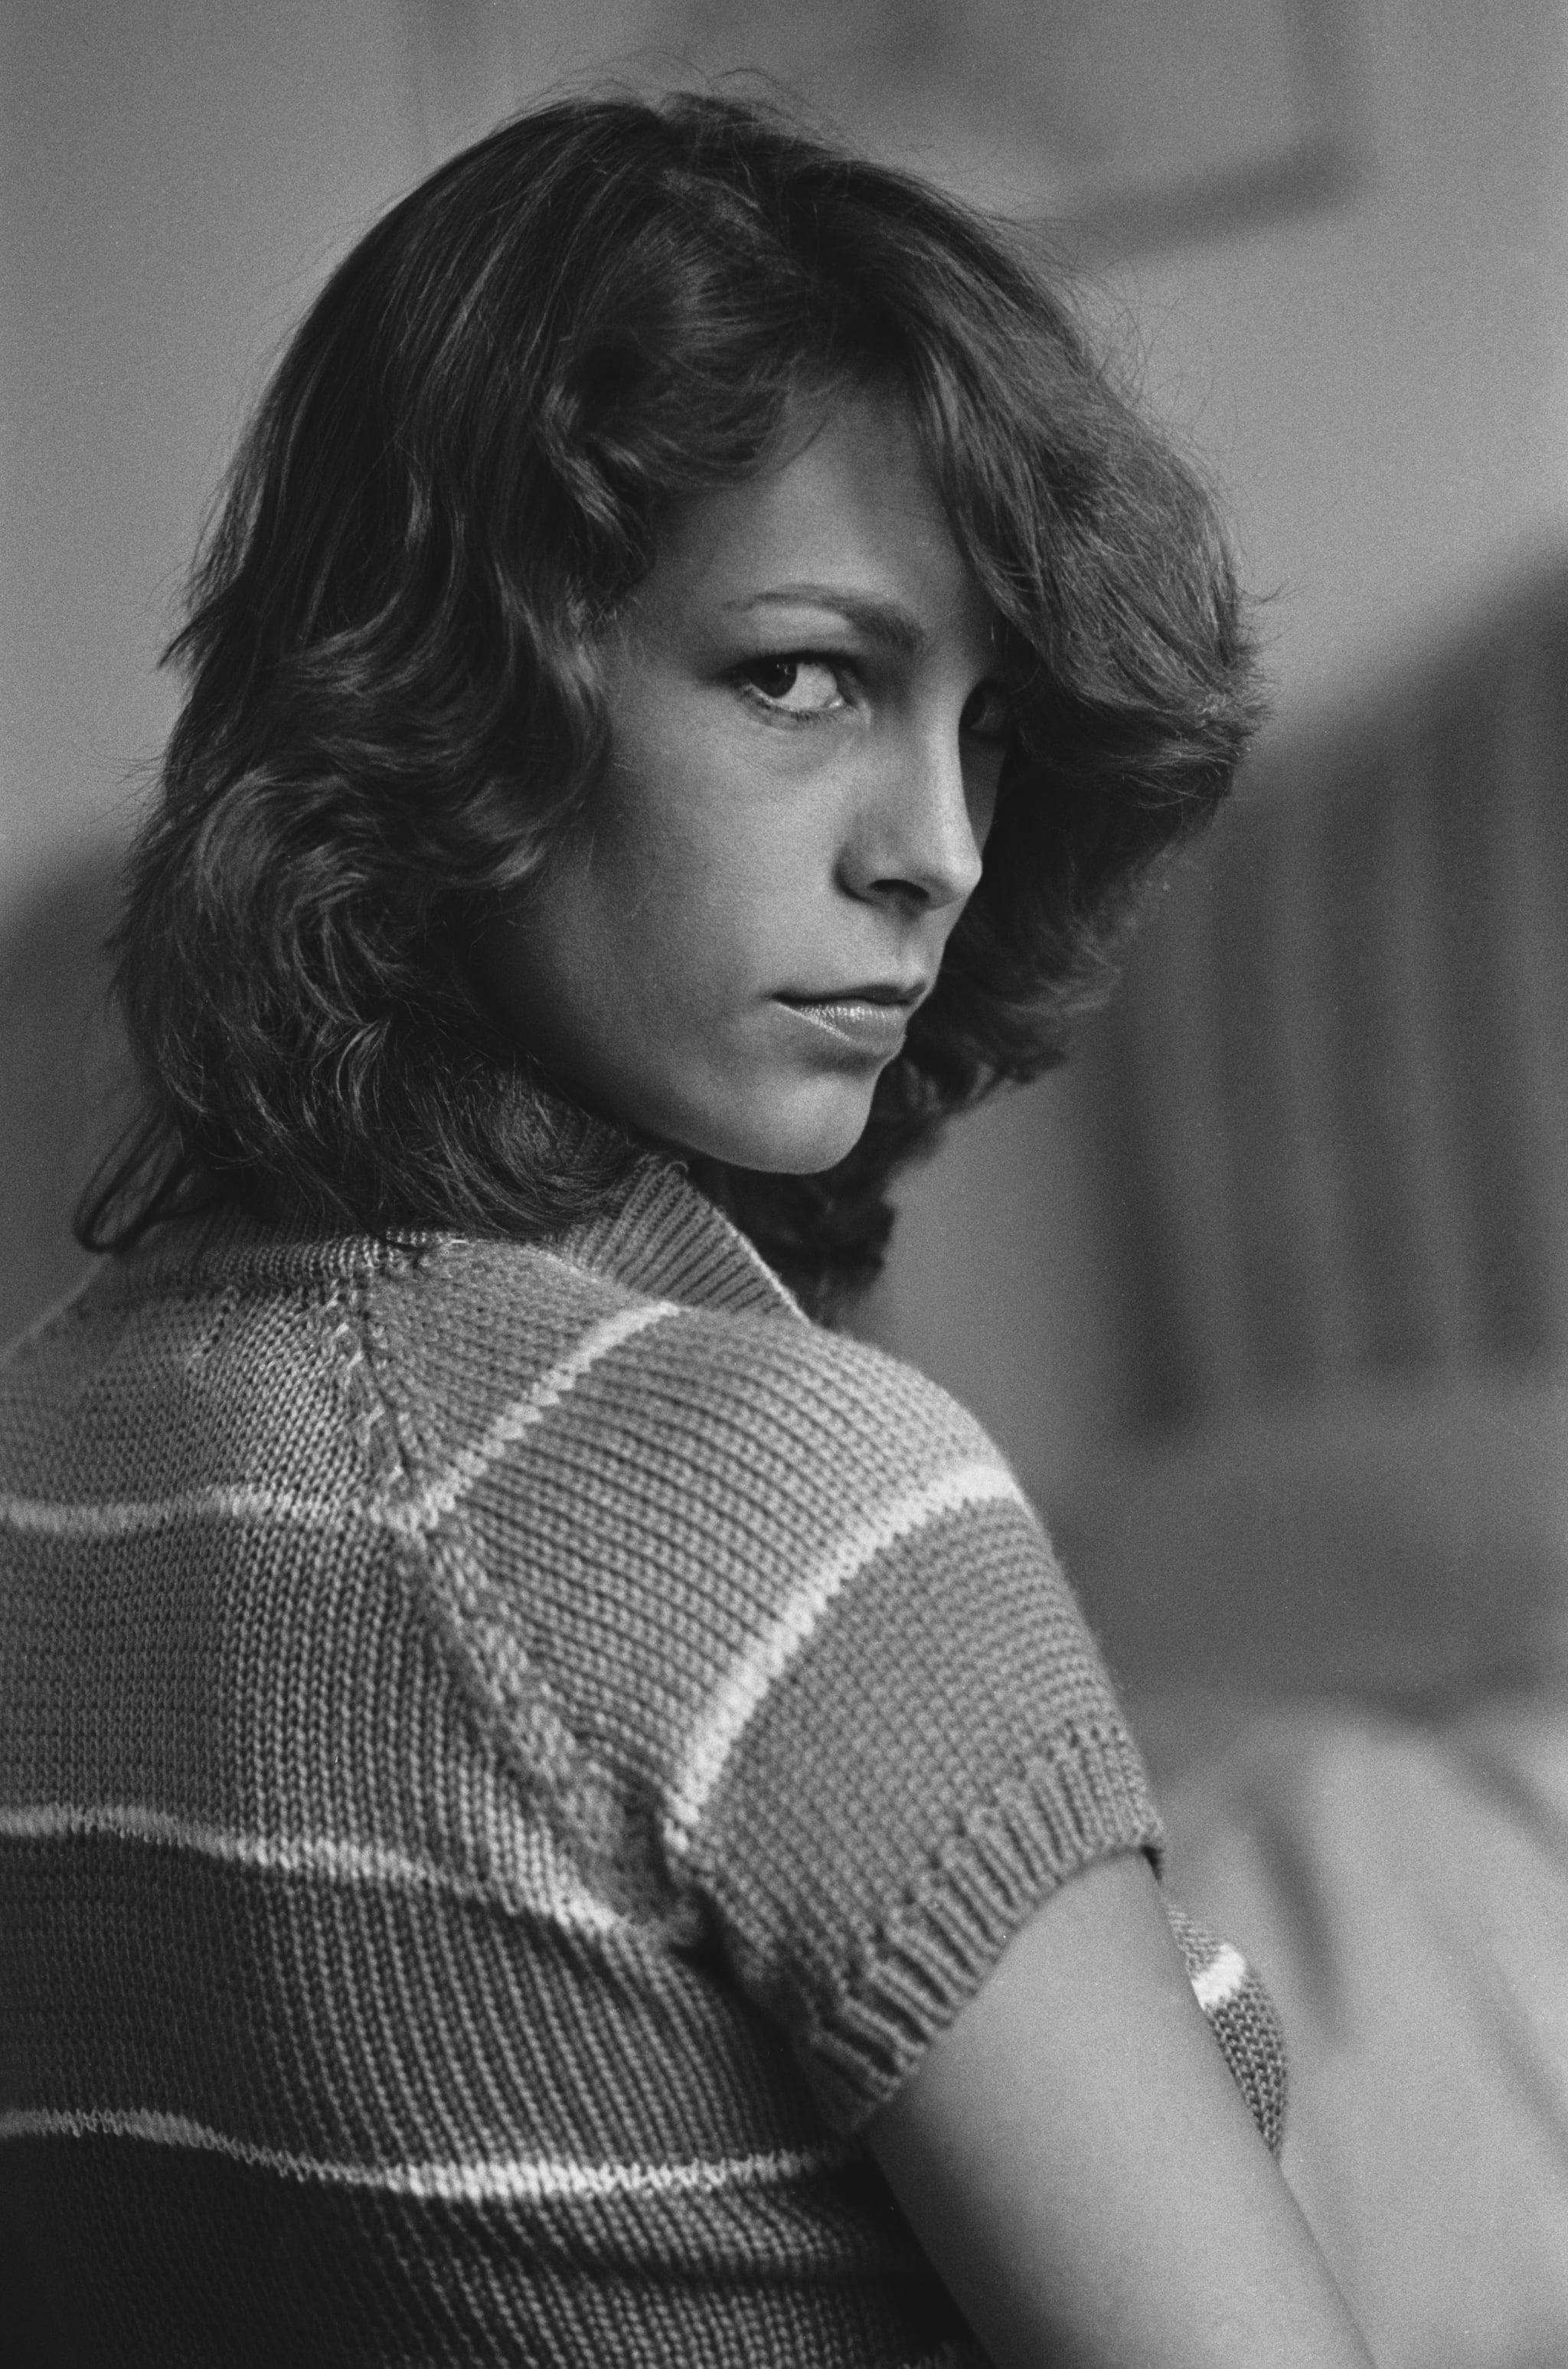 Jamie lee curtis young